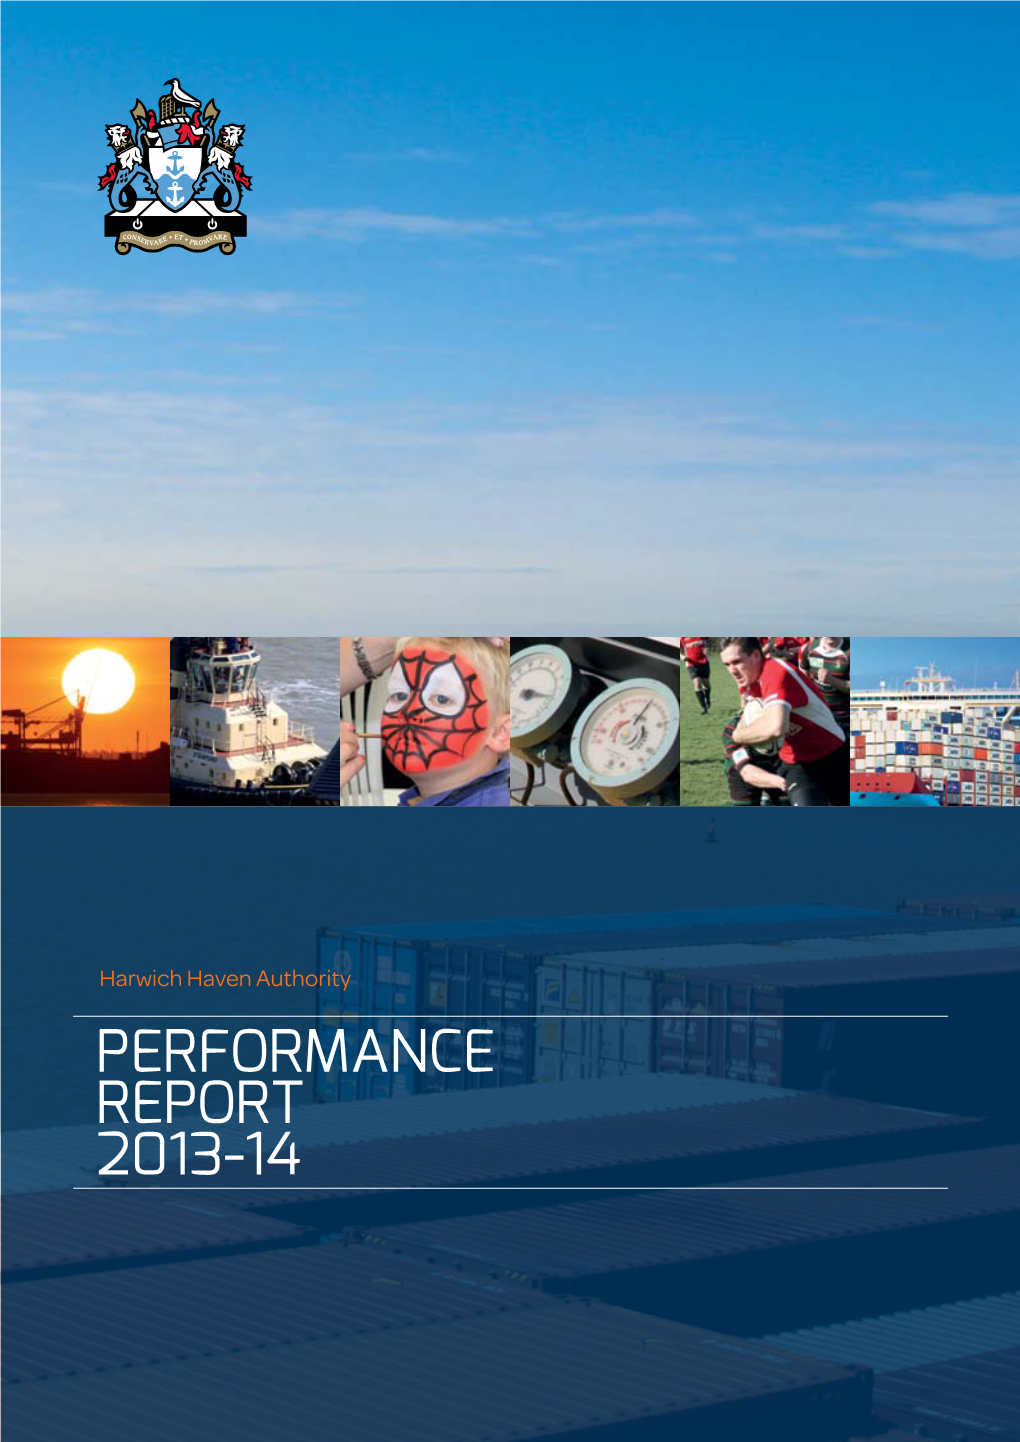 PERFORMANCE REPORT 2013-14 Harwich Haven Authority